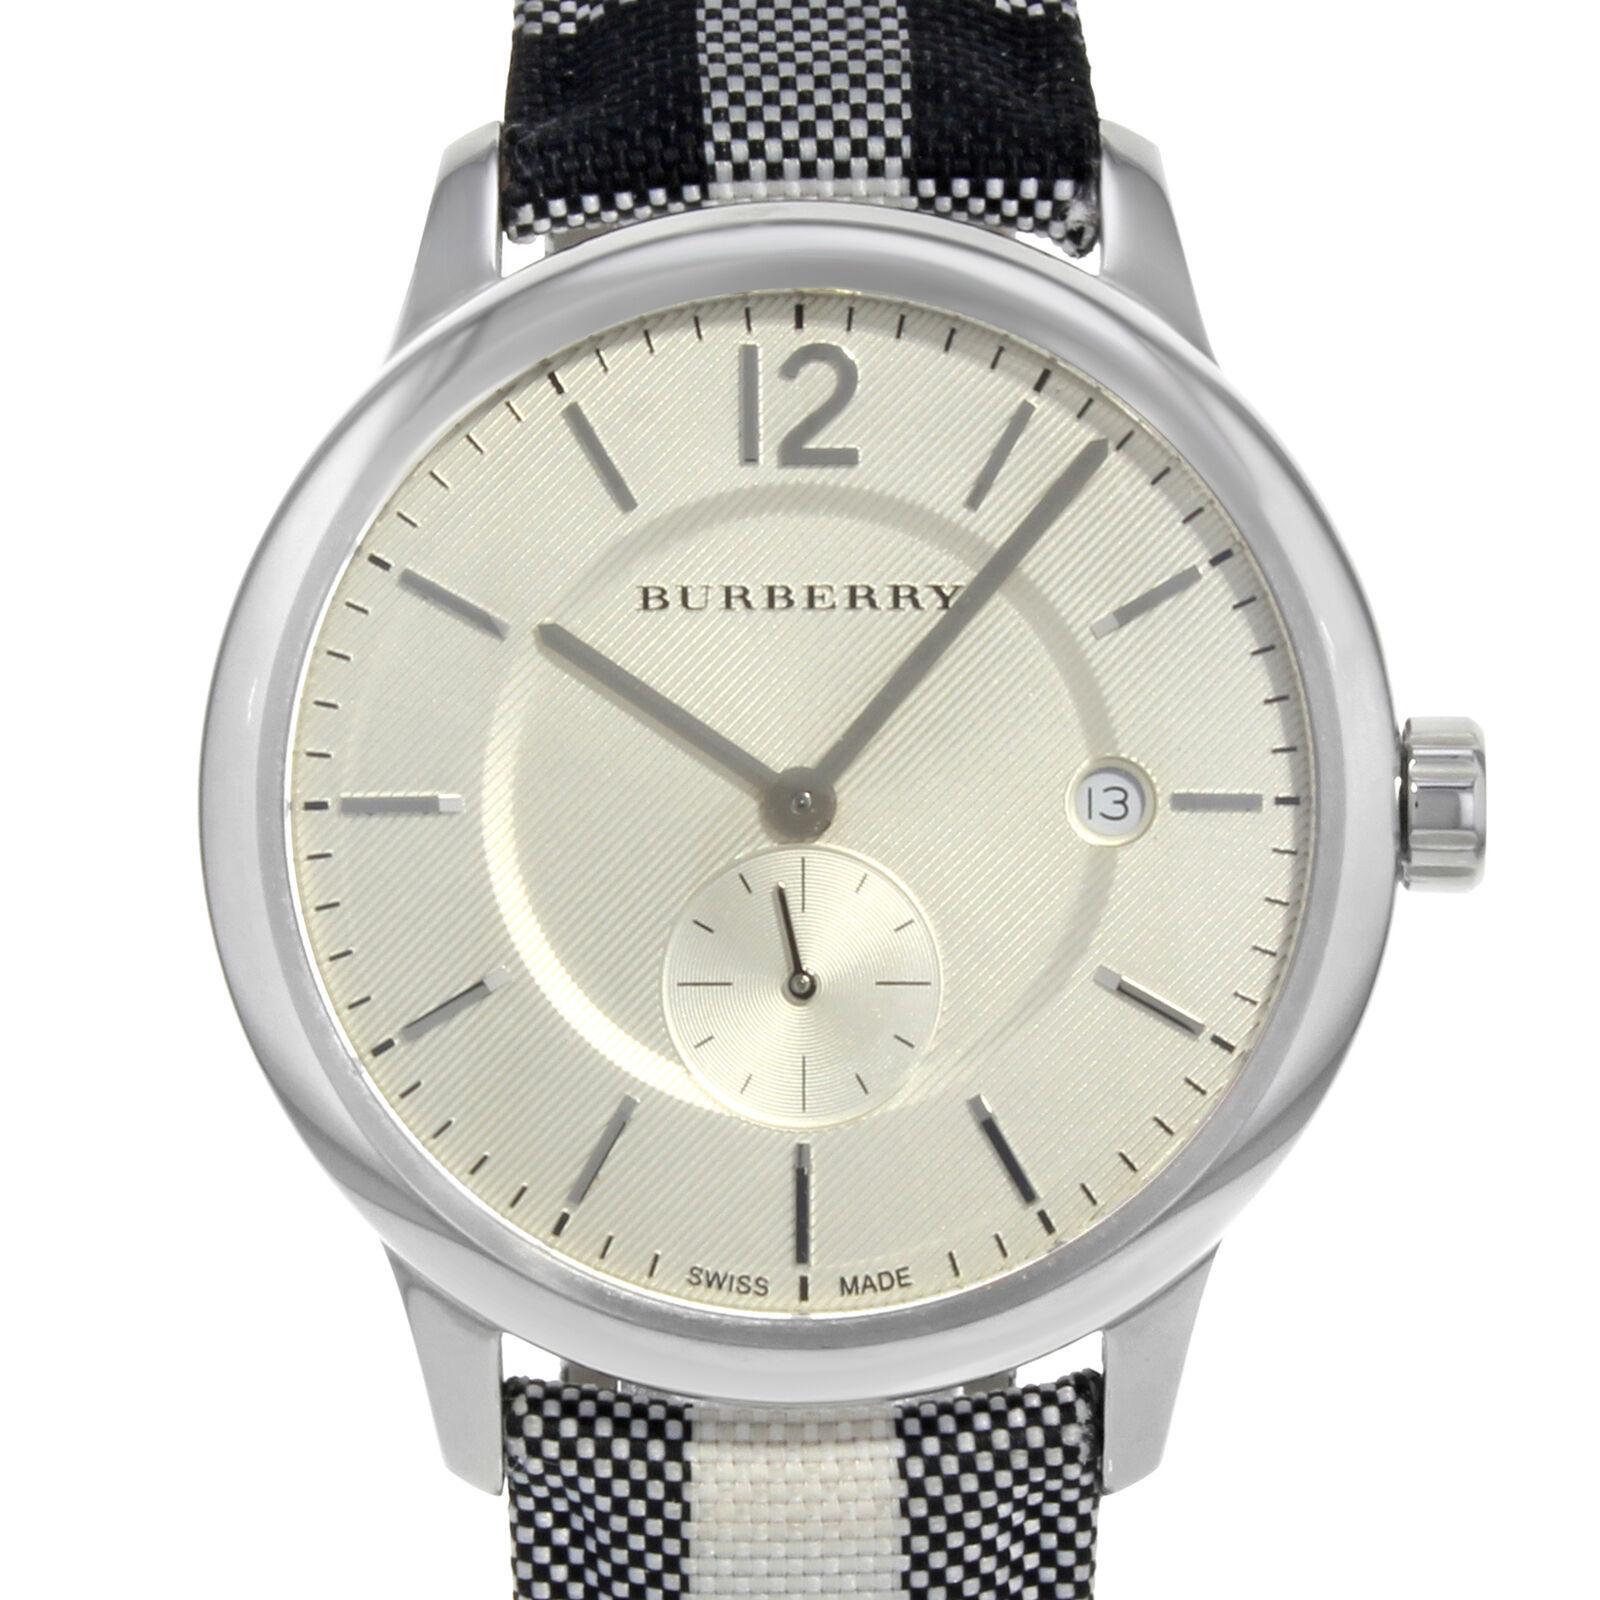 This display model Burberry The Classic BU10002  is a beautiful Unisex timepiece that is powered by quartz (battery) movement which is cased in a stainless steel case. It has a round shape face, date indicator, small seconds subdial dial and has